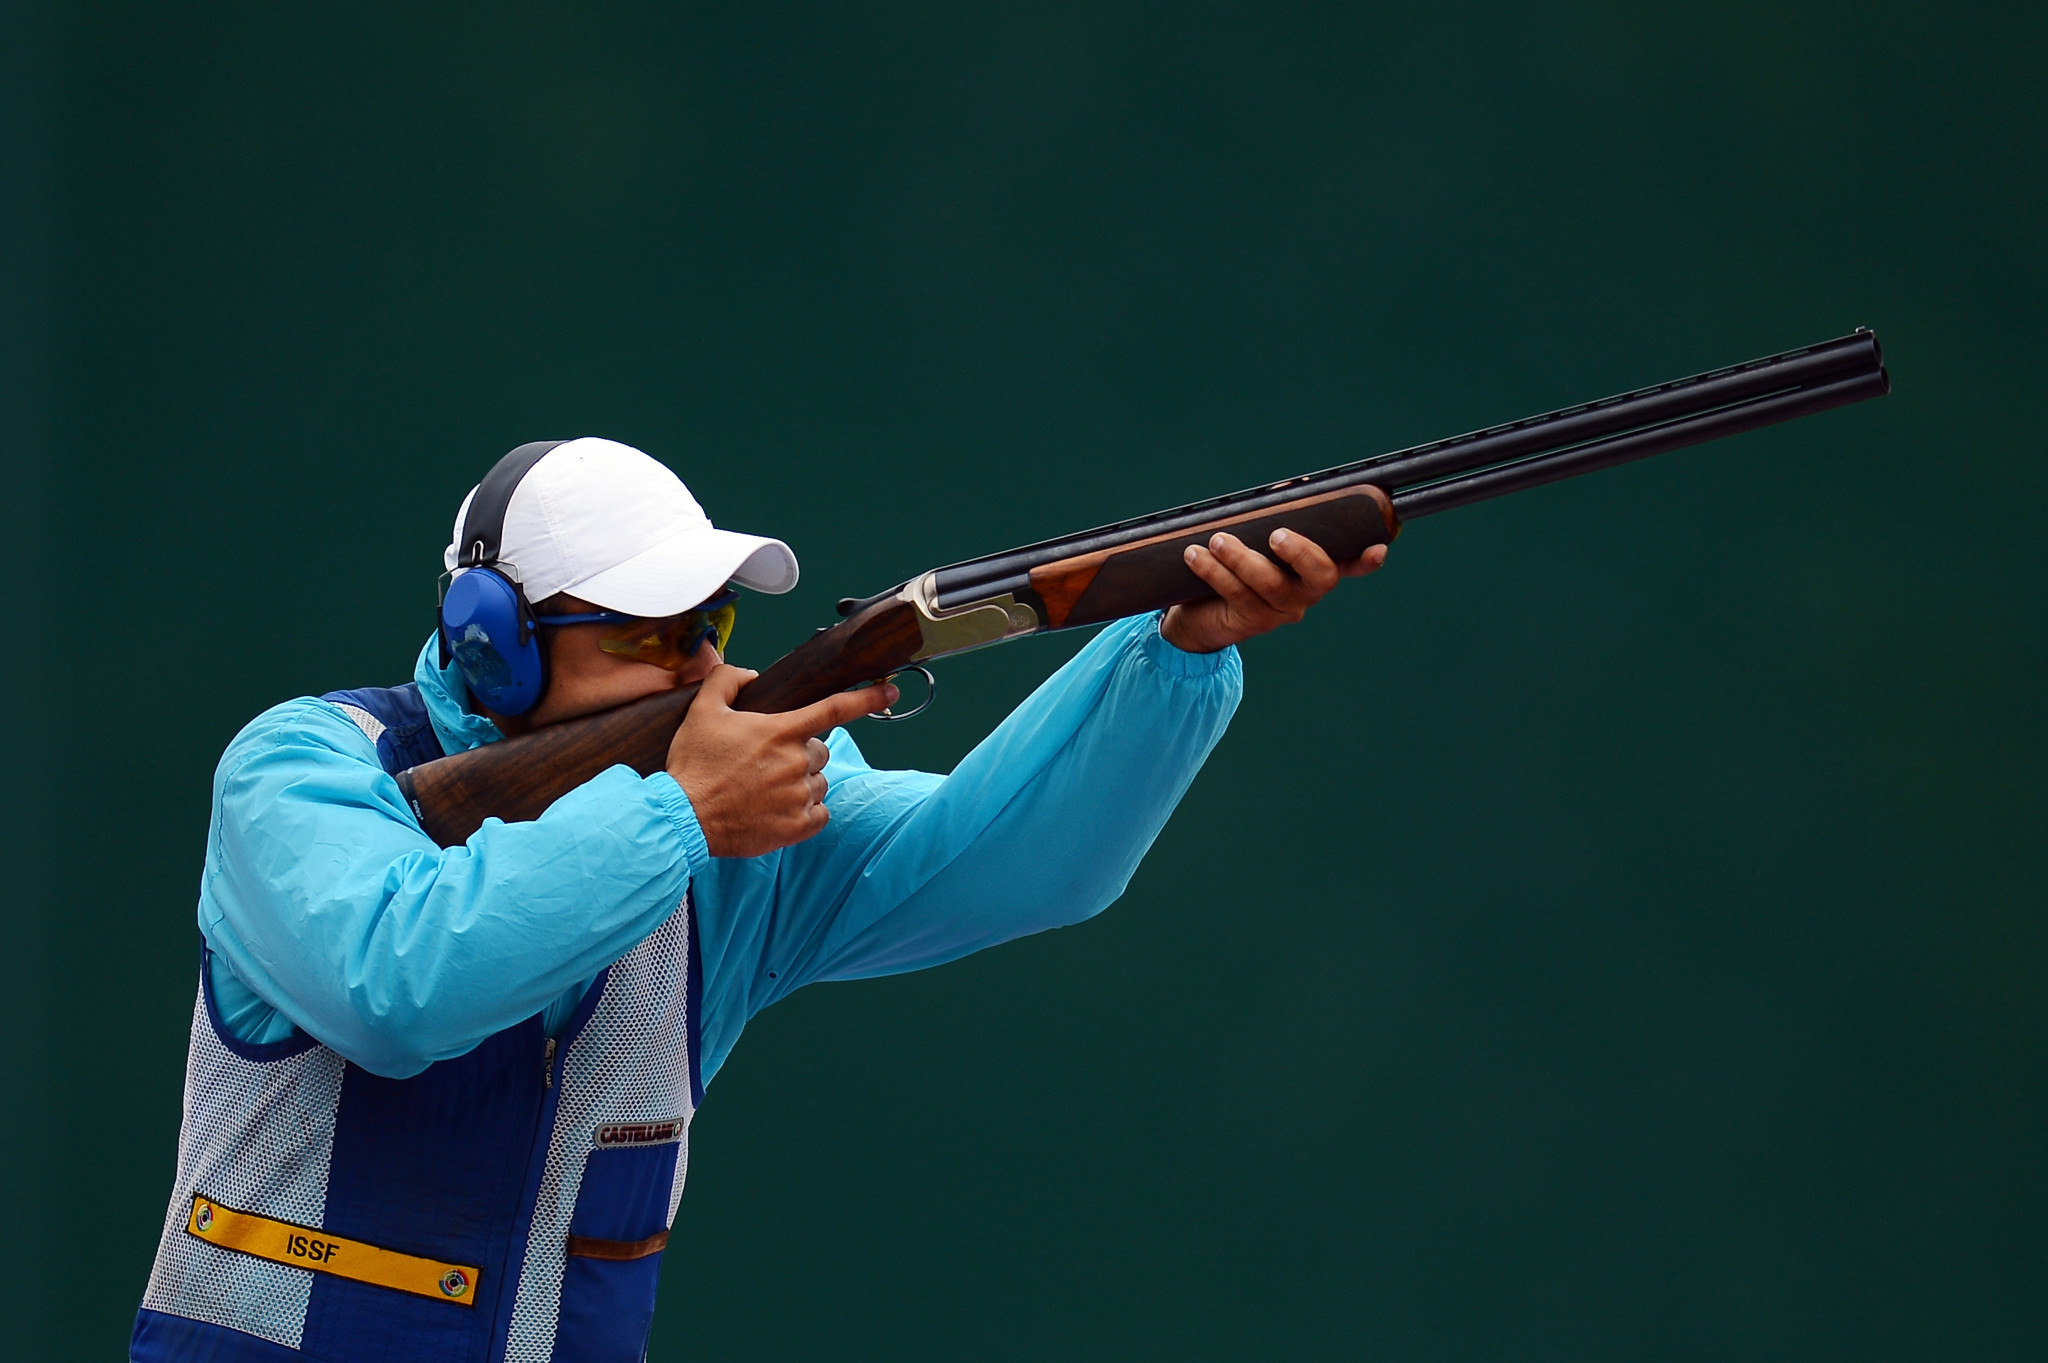 Azmy Mehelba won the men's skeet contest at the ISSF World Cup in Lonato ©Getty Images